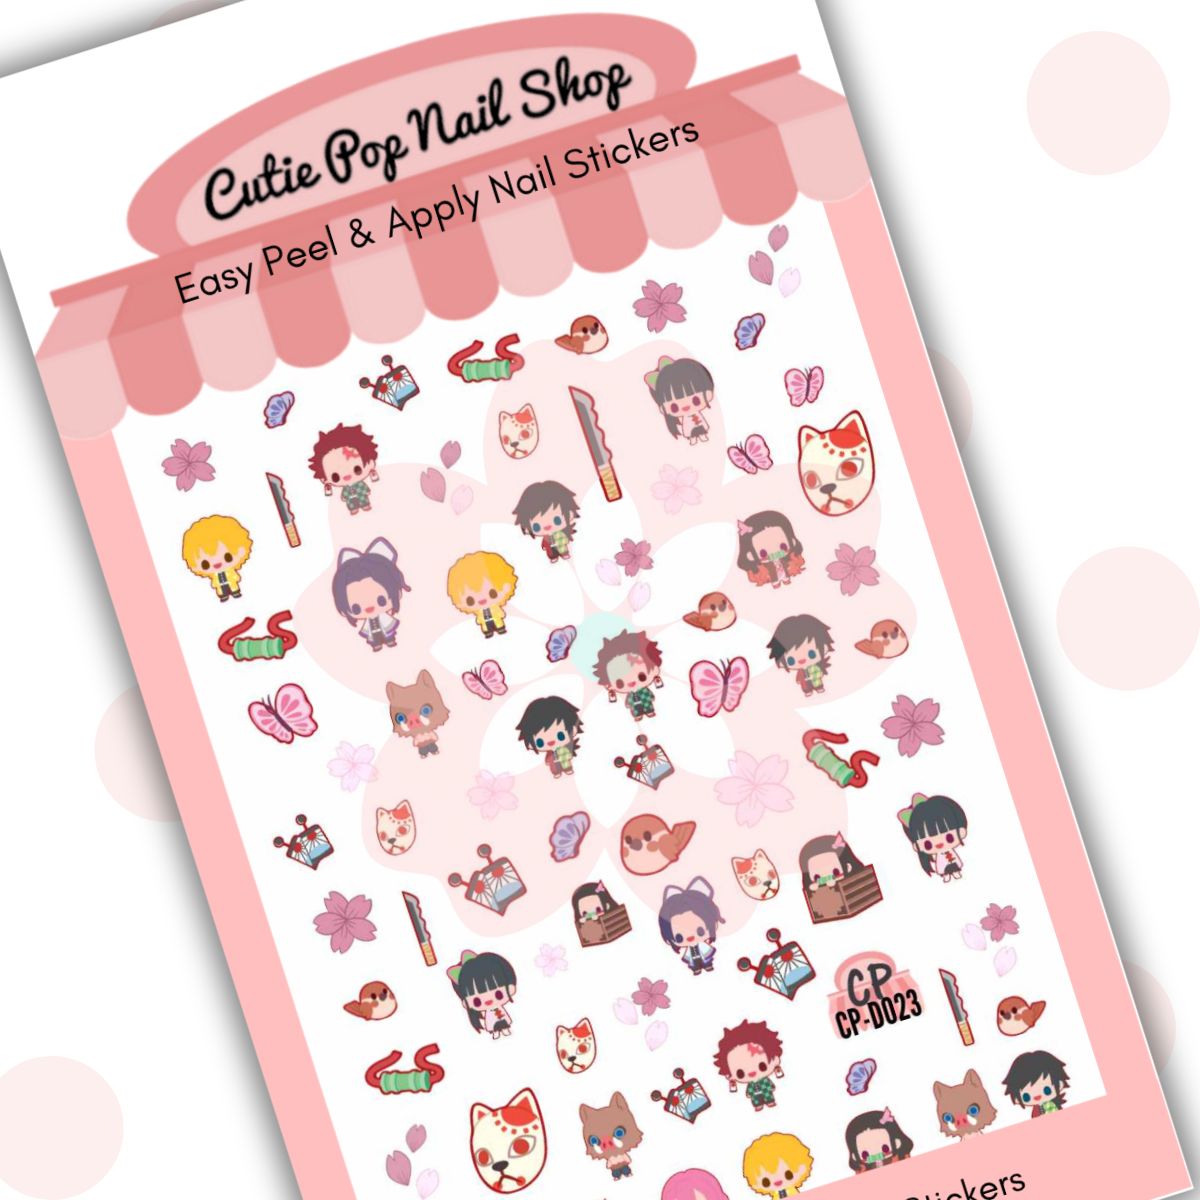 Cutie Pop Nail Shop’s Chibi Slayers nail decals. These kawaii chibi-style fanart nail decal designs include miniature anime slayer characters such as nezuko and tanjiro. The characters are dressed in combat-friendly attire, which is multicolored. Other designs include a bloody knife, a brown sitting bird, a range of light-pink-colored flowers, pink and blue butterflies, pink and white leaves, a person with a boar’s head, a person hiding in a box, and a neko mask.